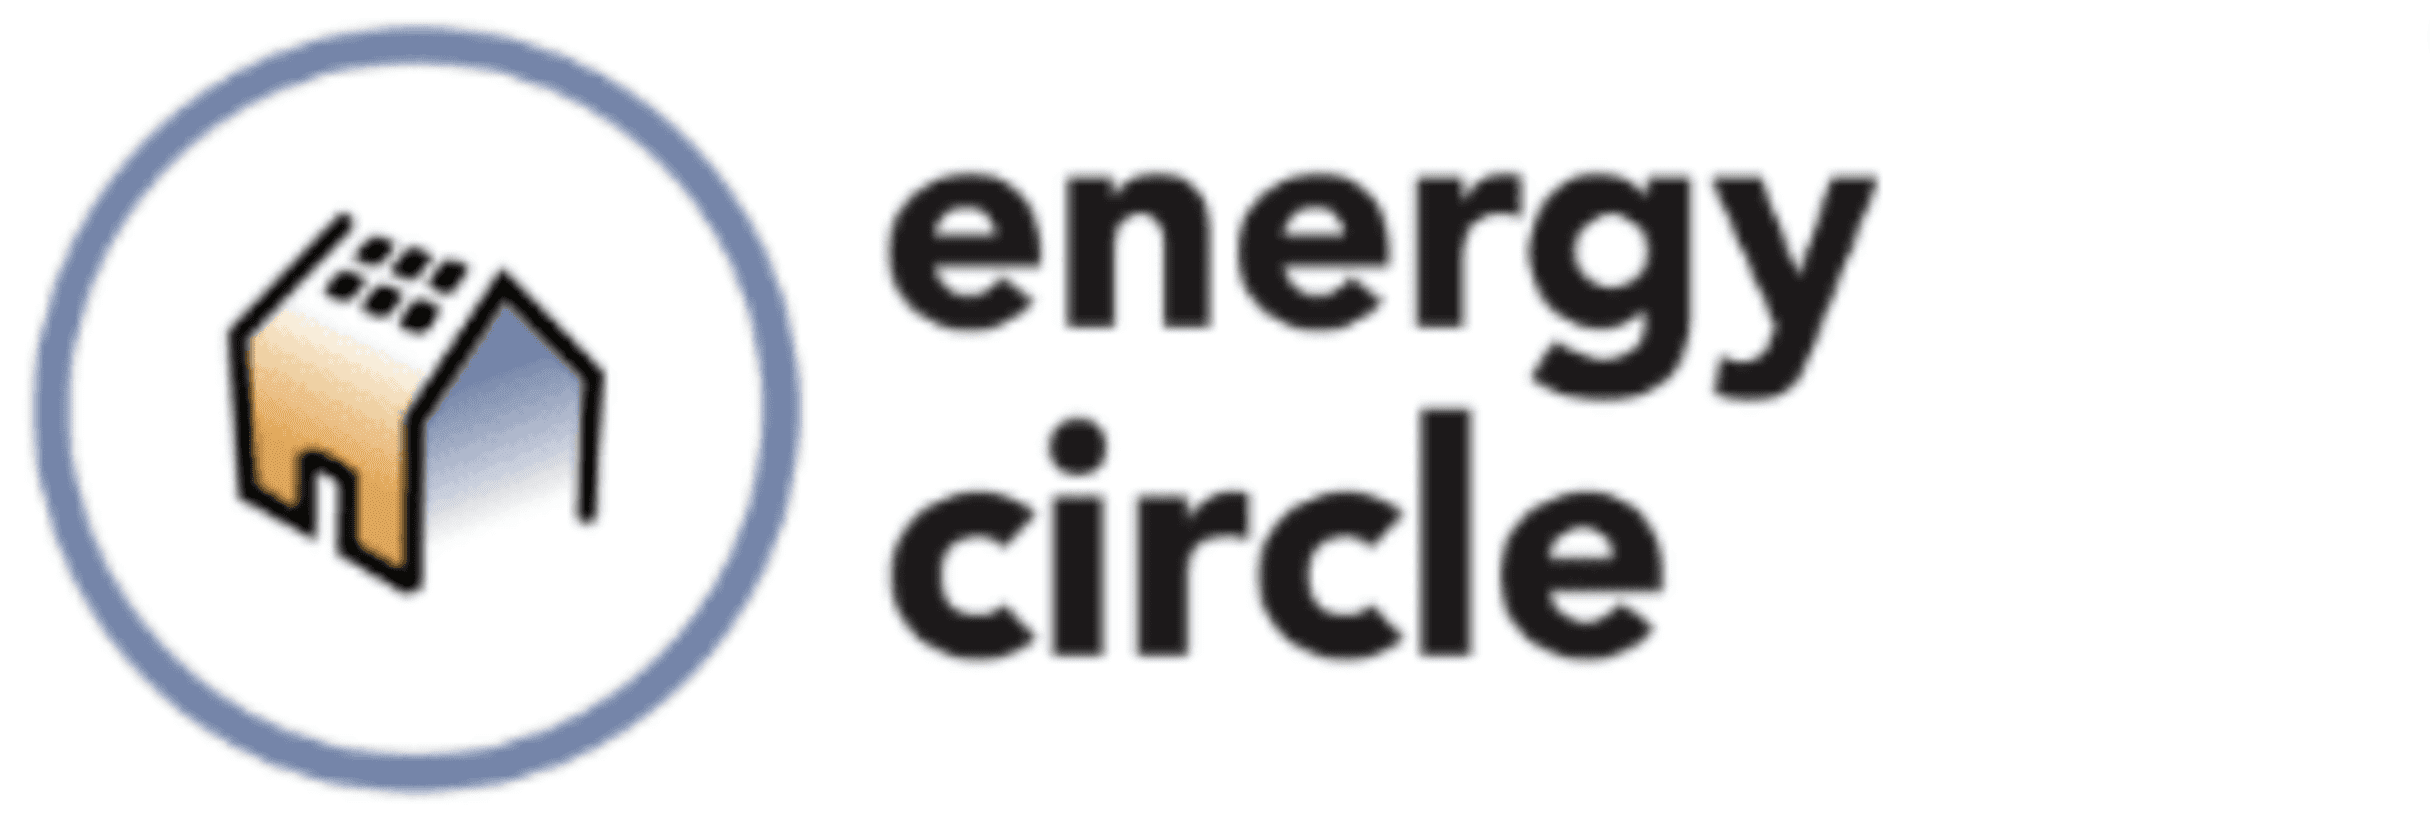 Energy Circle logo with illustration of home